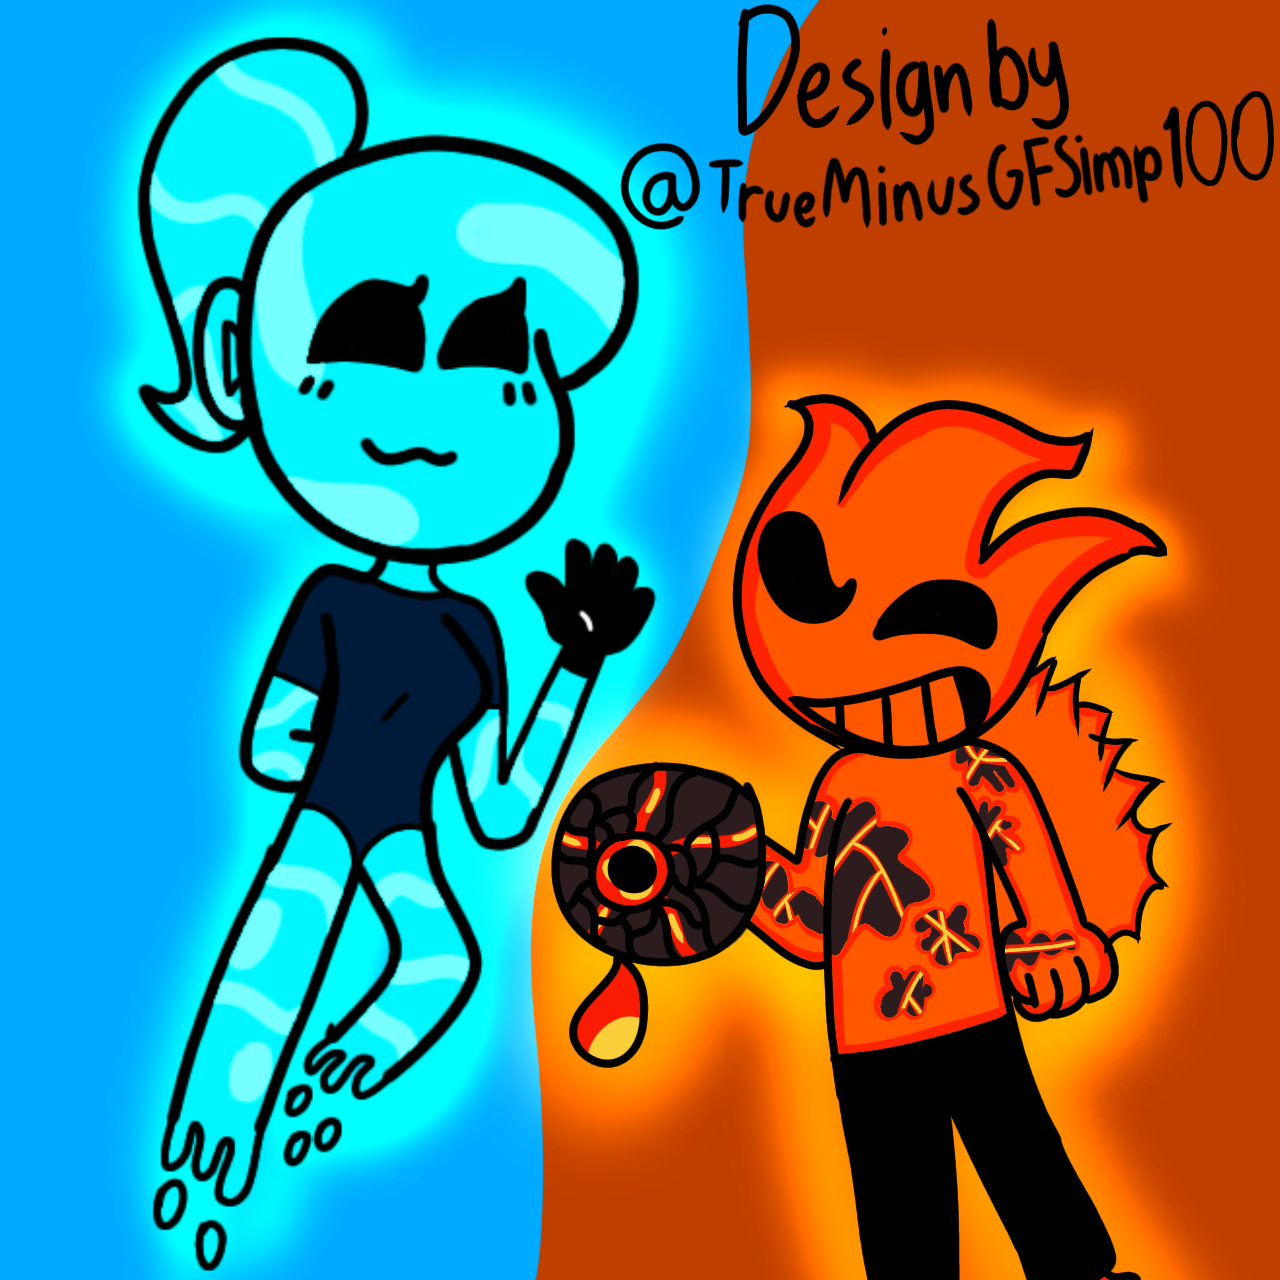 FIRE AND WATER MINEGIRL (Fireboy and Watergirl) 